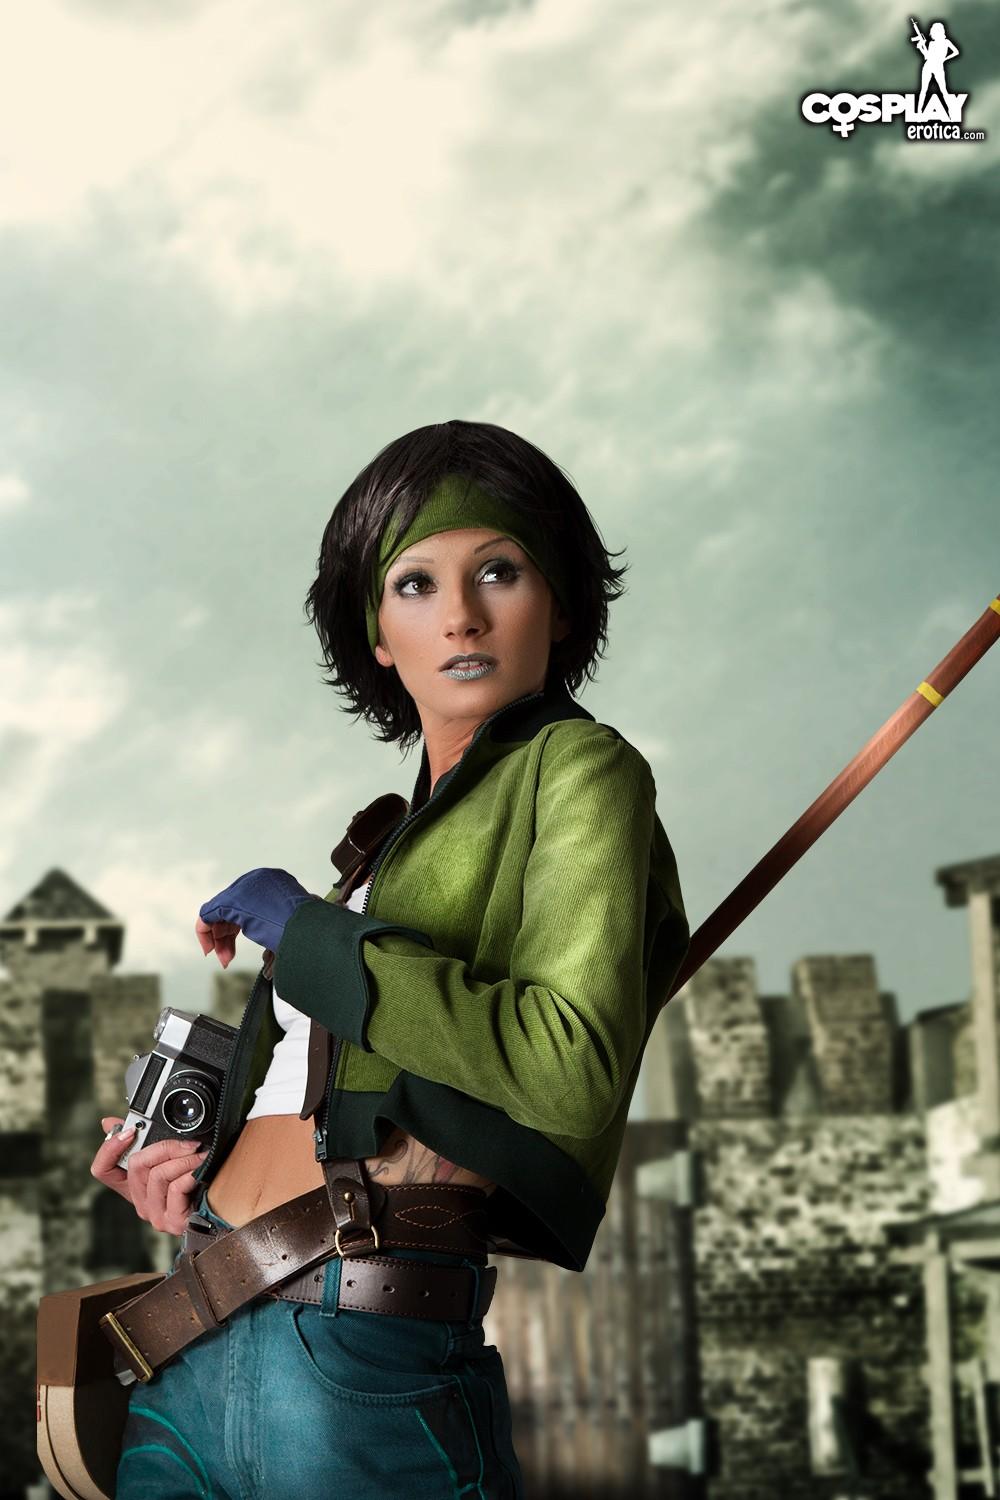 Cosplay hottie Zorah dresses up as Jade from Beyond Good and Evil #60210605